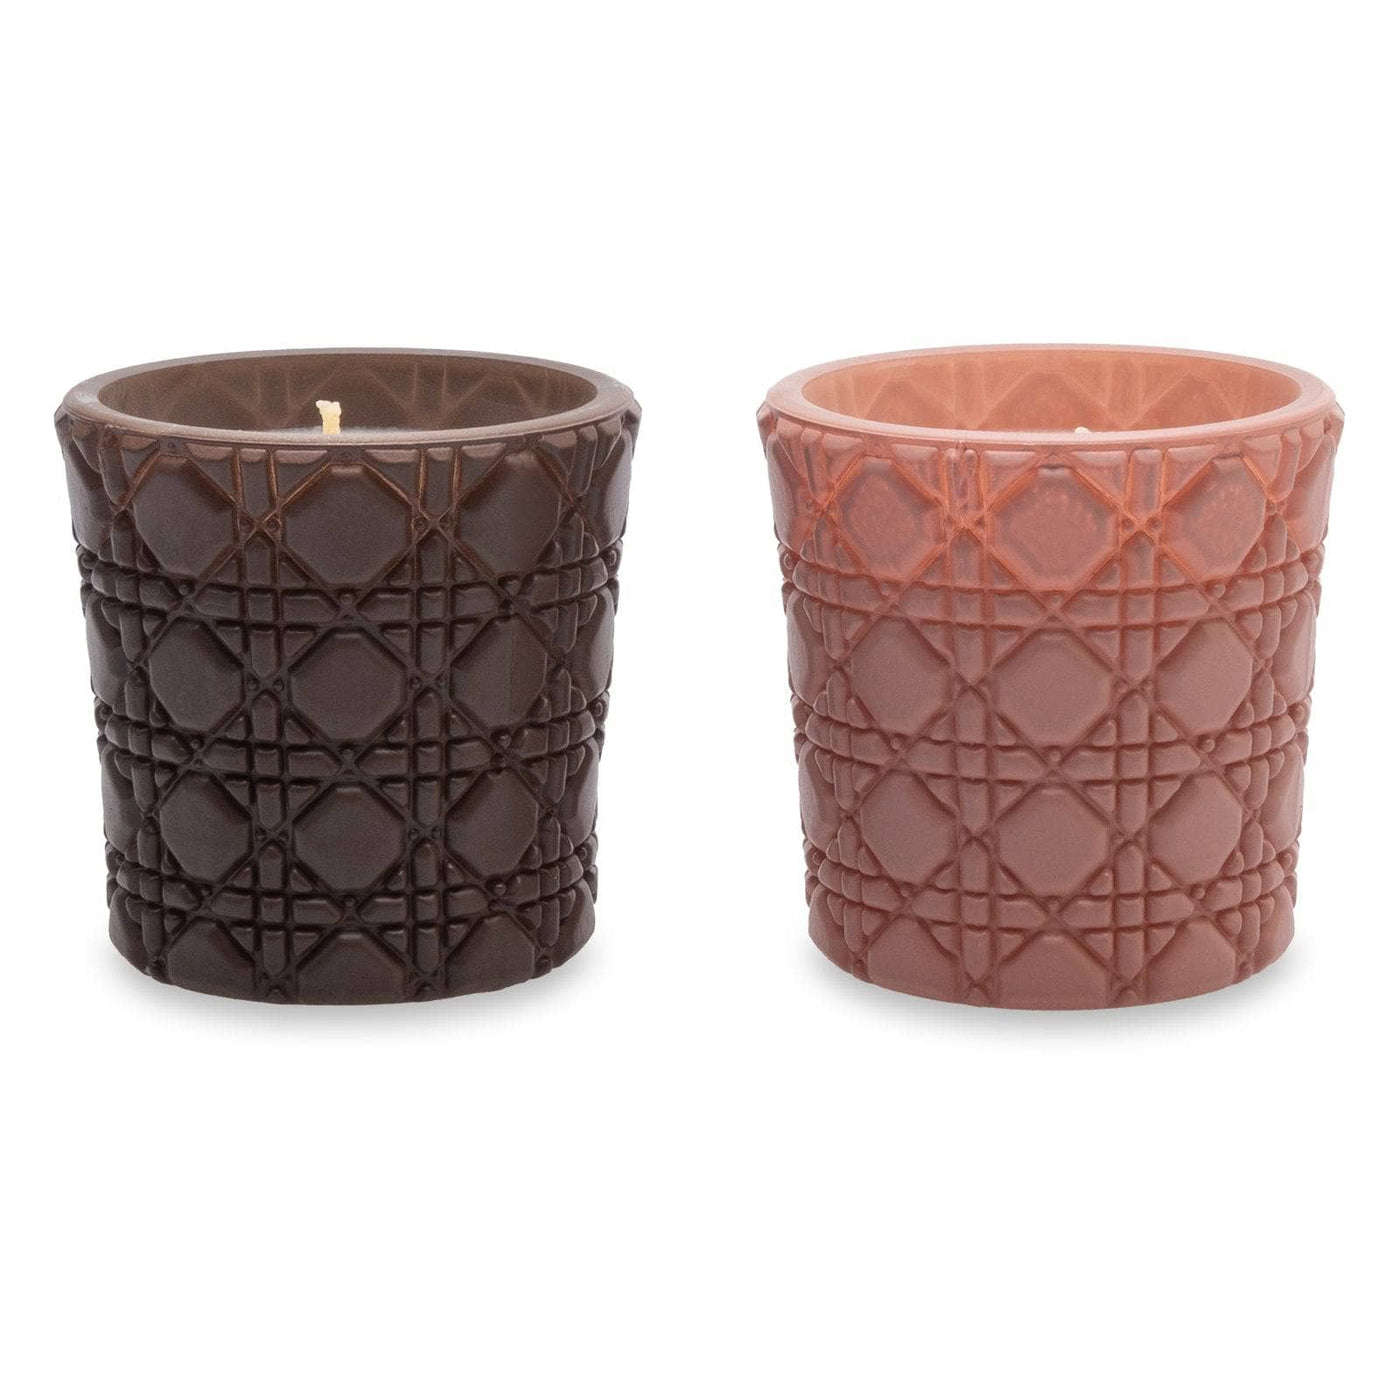 Mellowed Out and Re-energise Set of 2 Mini Soy Wax Candles, 145 g each Candles sazy.com